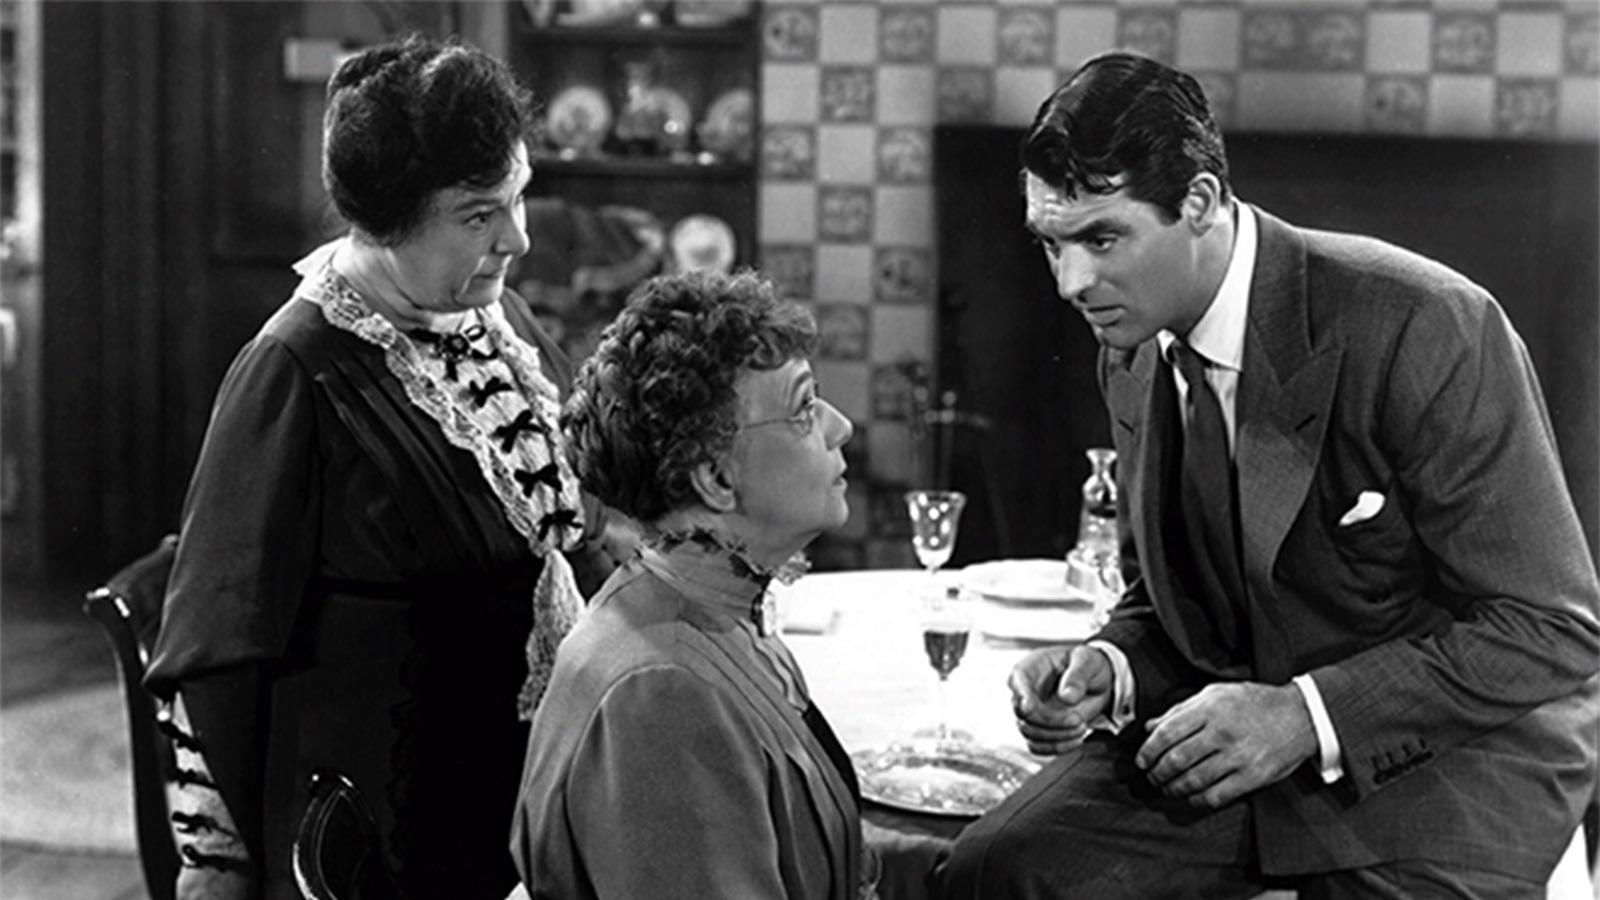 Still from the 1944 film Arsenic and Old Lace showing Josephine Hull, Jean Adair, and Cary Grant from left to right